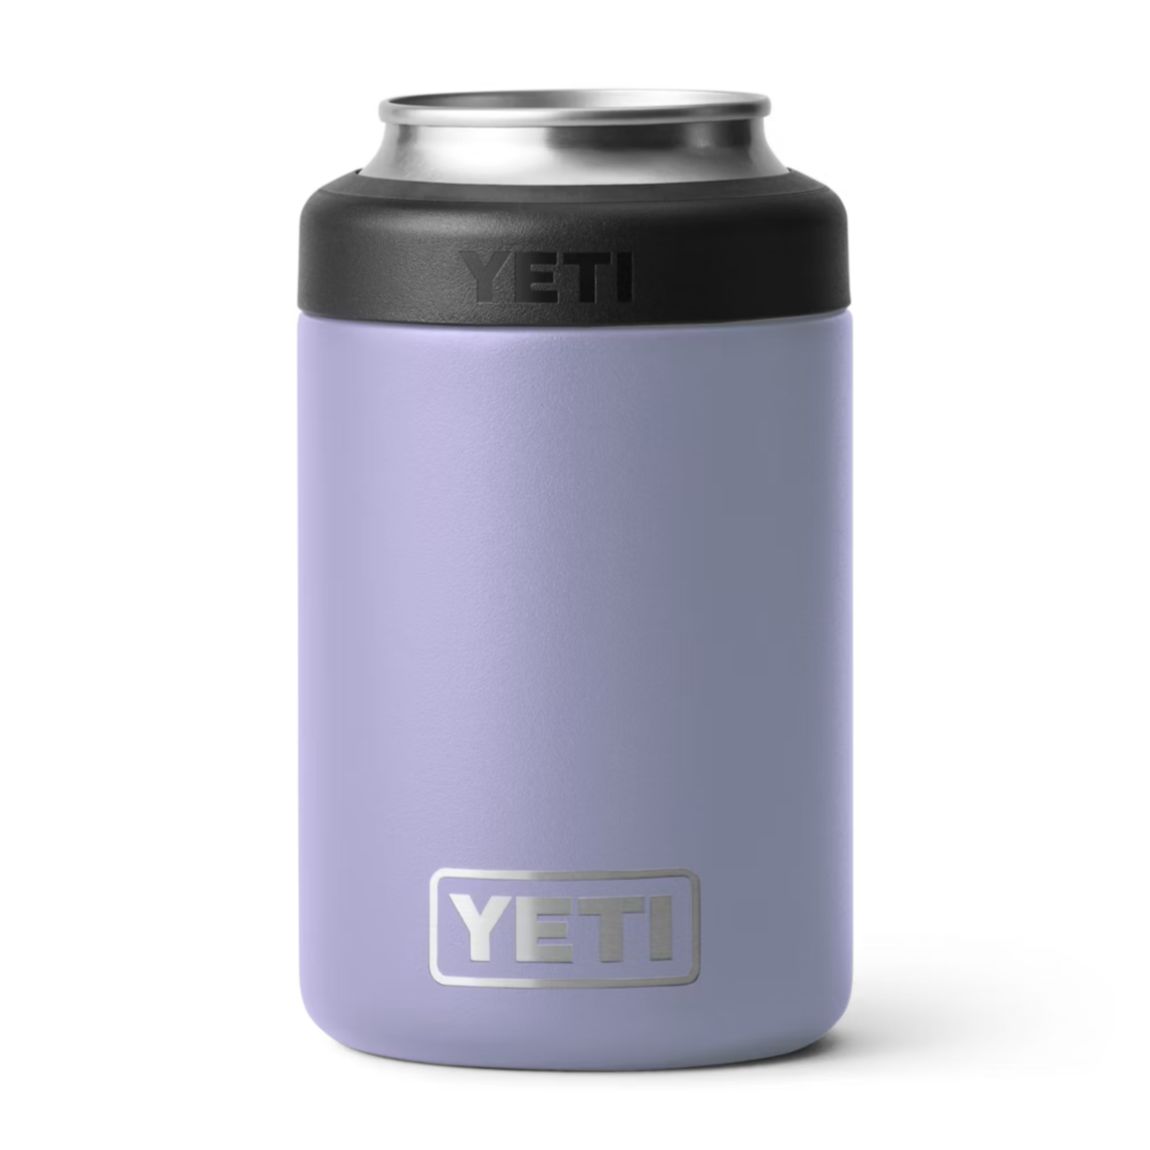 Yeti Rambler 12 oz. Colster Can Insulator-Hunting/Outdoors-Cosmic Lilac-Kevin's Fine Outdoor Gear & Apparel